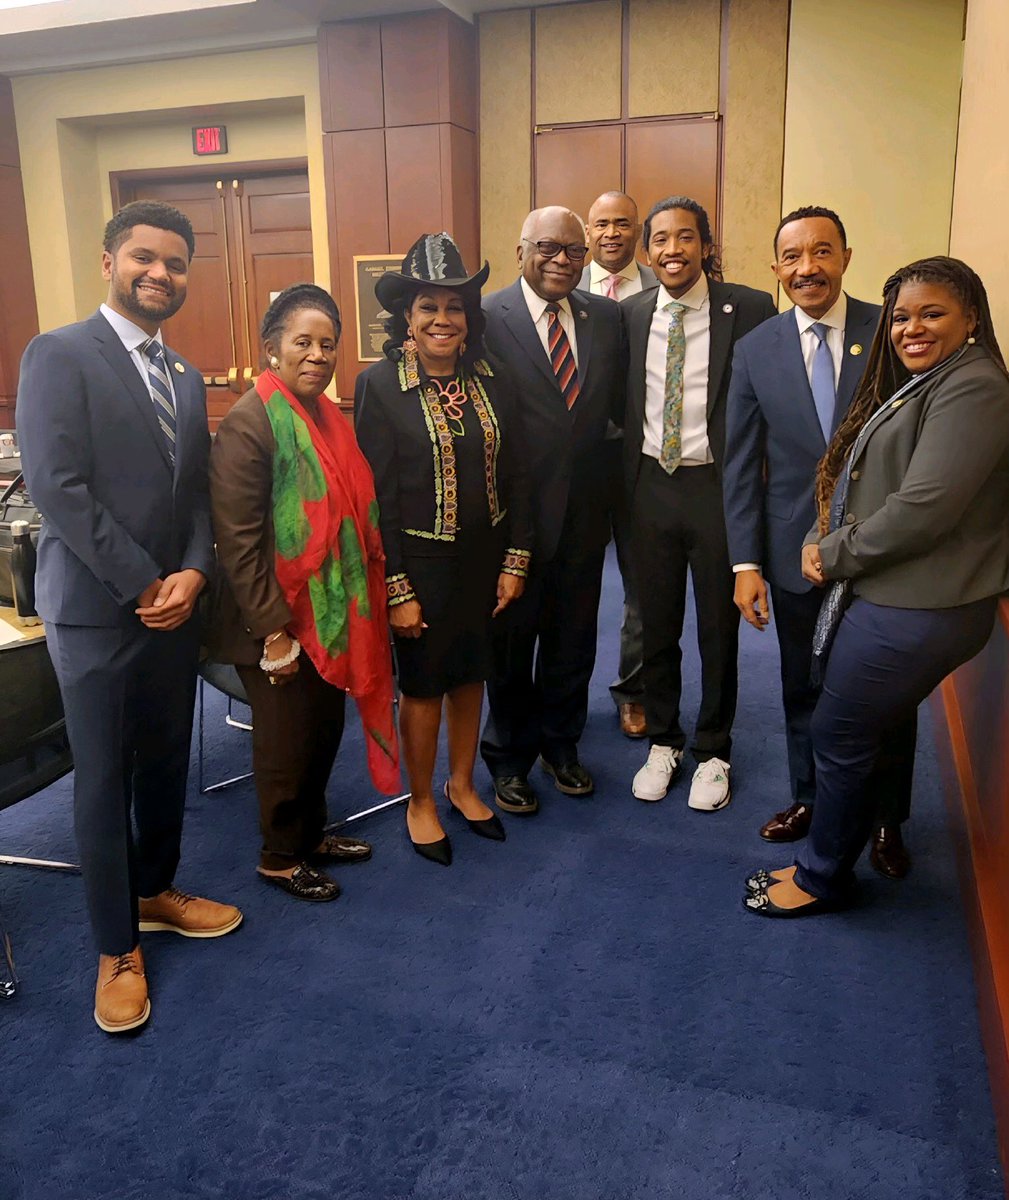 Met with @brotherjones_ of the #Tennessee3 along with @TheBlackCaucus today to underscore our support. #TennesseeThree